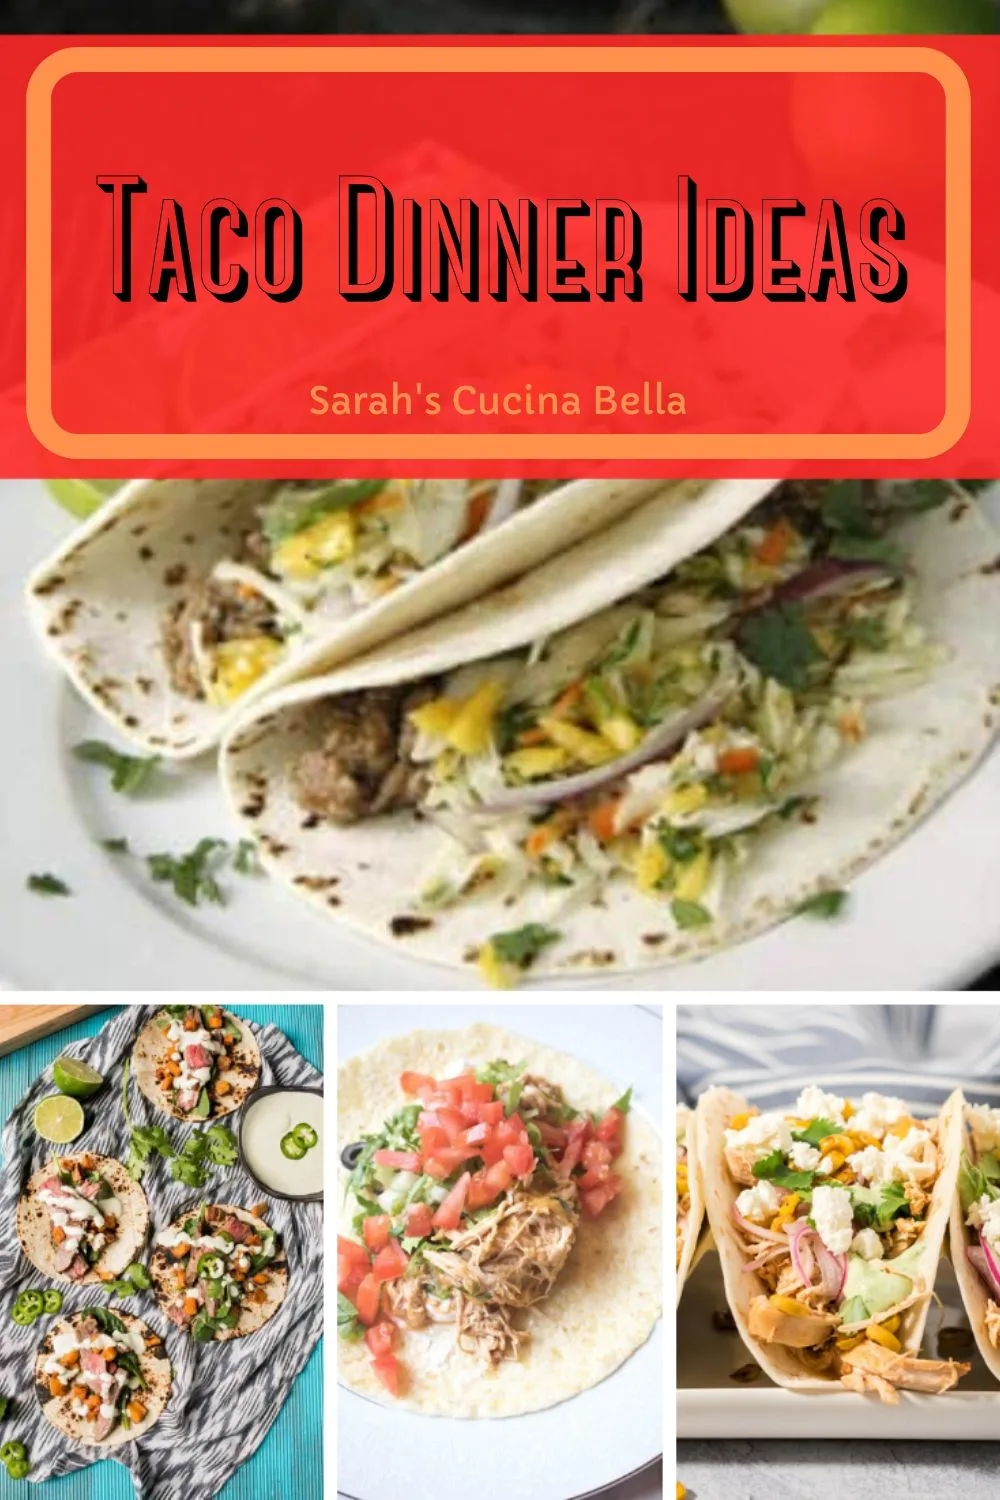 These 21 Taco Dinner Ideas will make your next taco dinner a delight.